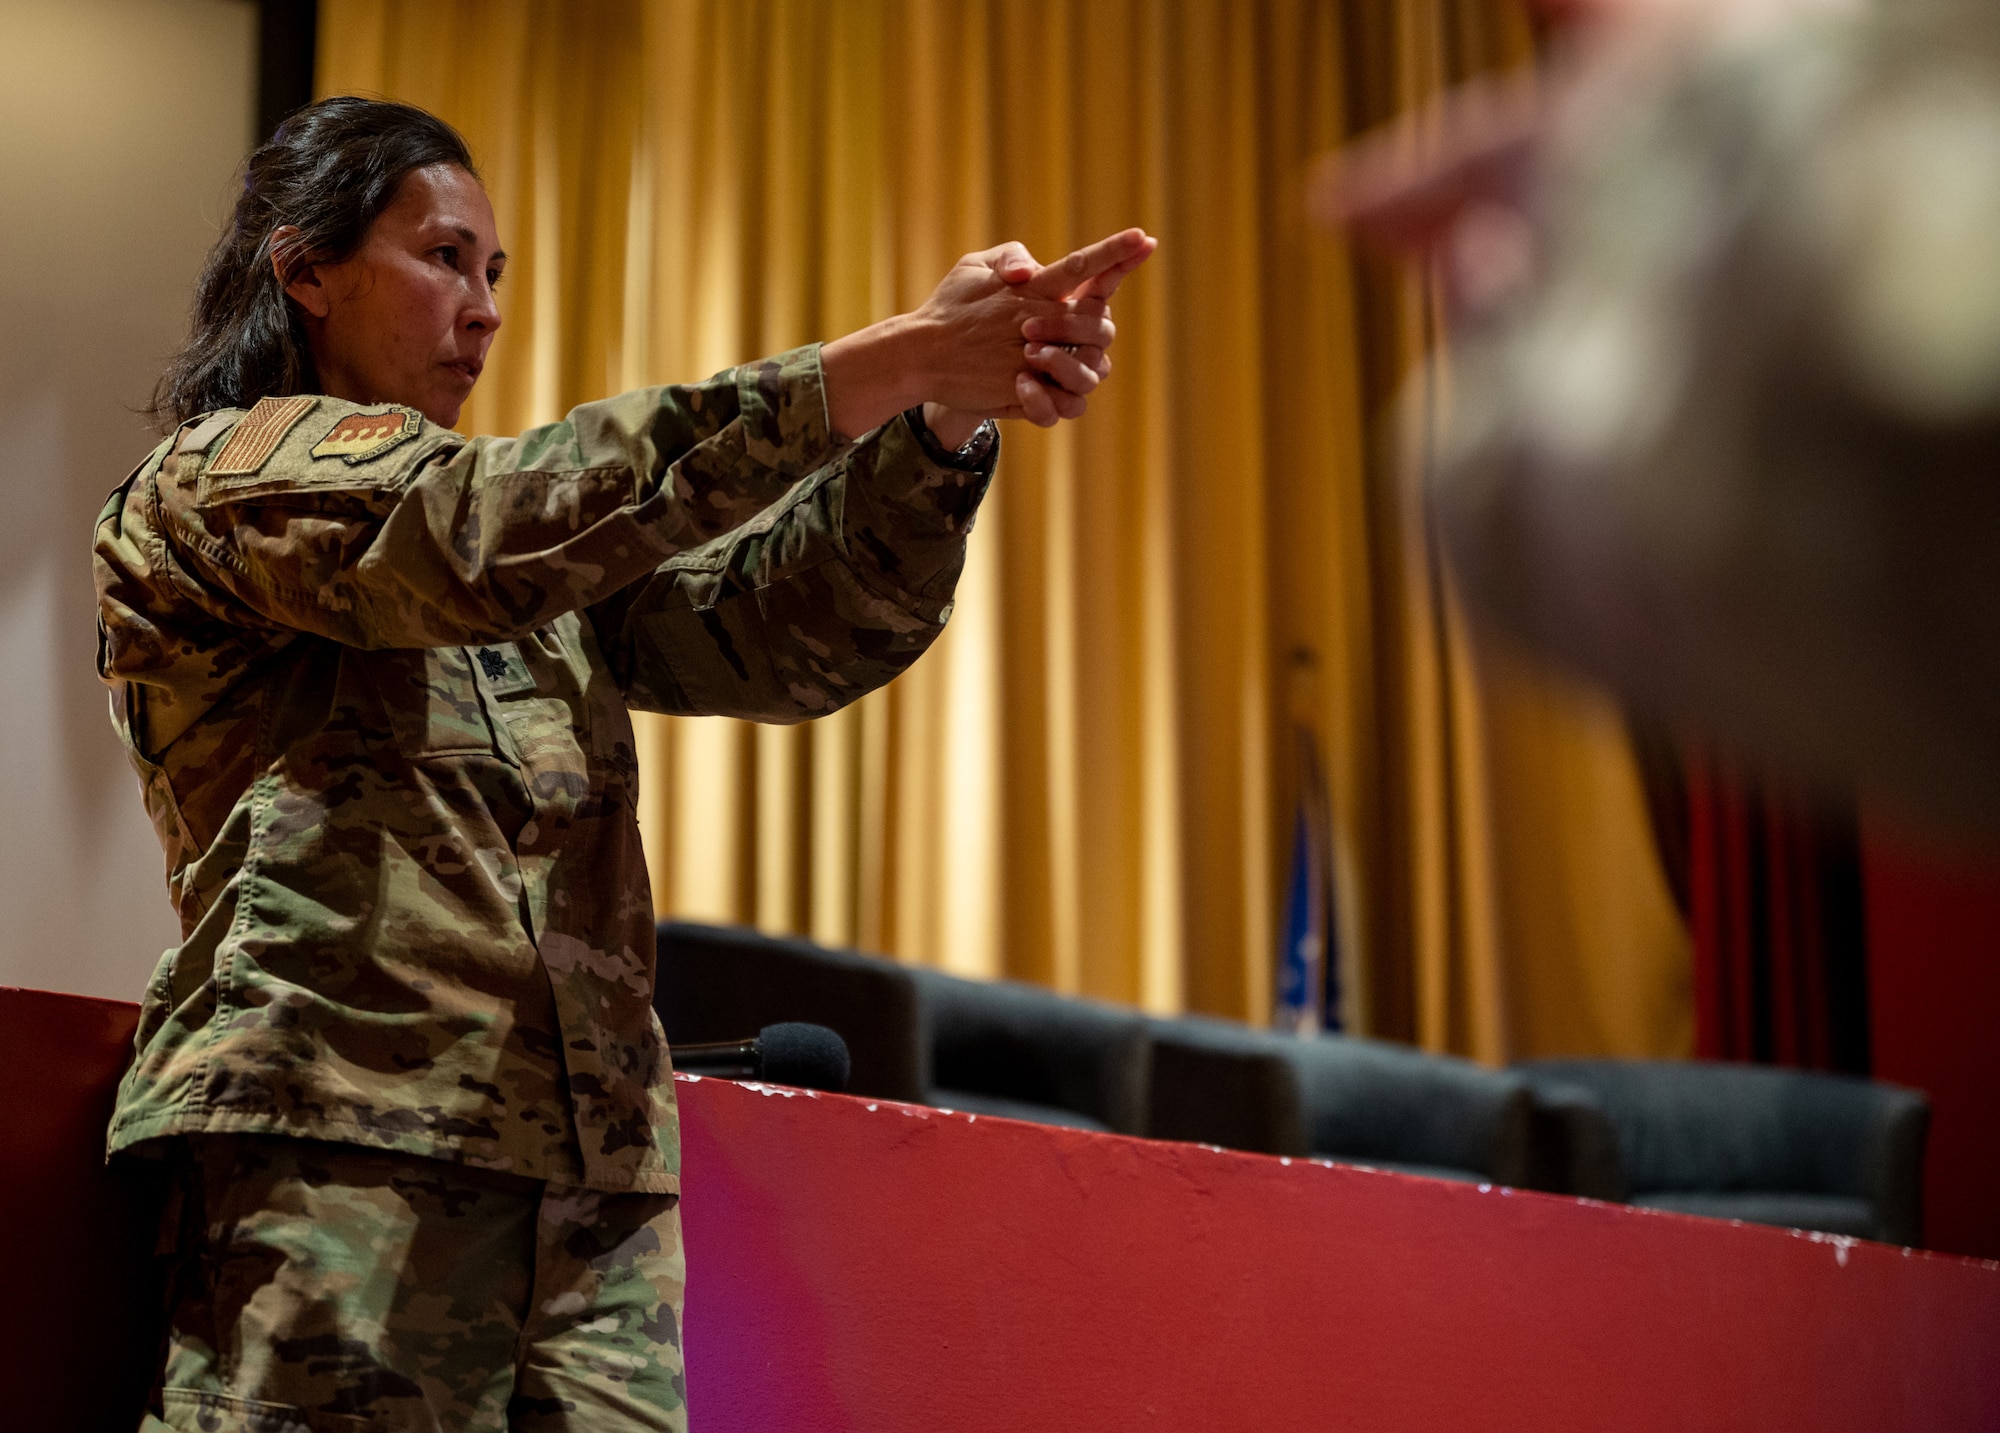 Lt. Col. Monika Johncour, 28th Bomb Wing director of staff, provides an example of a calming breathing technique at Ellsworth Air Force Base, S.D., March 2, 2022.